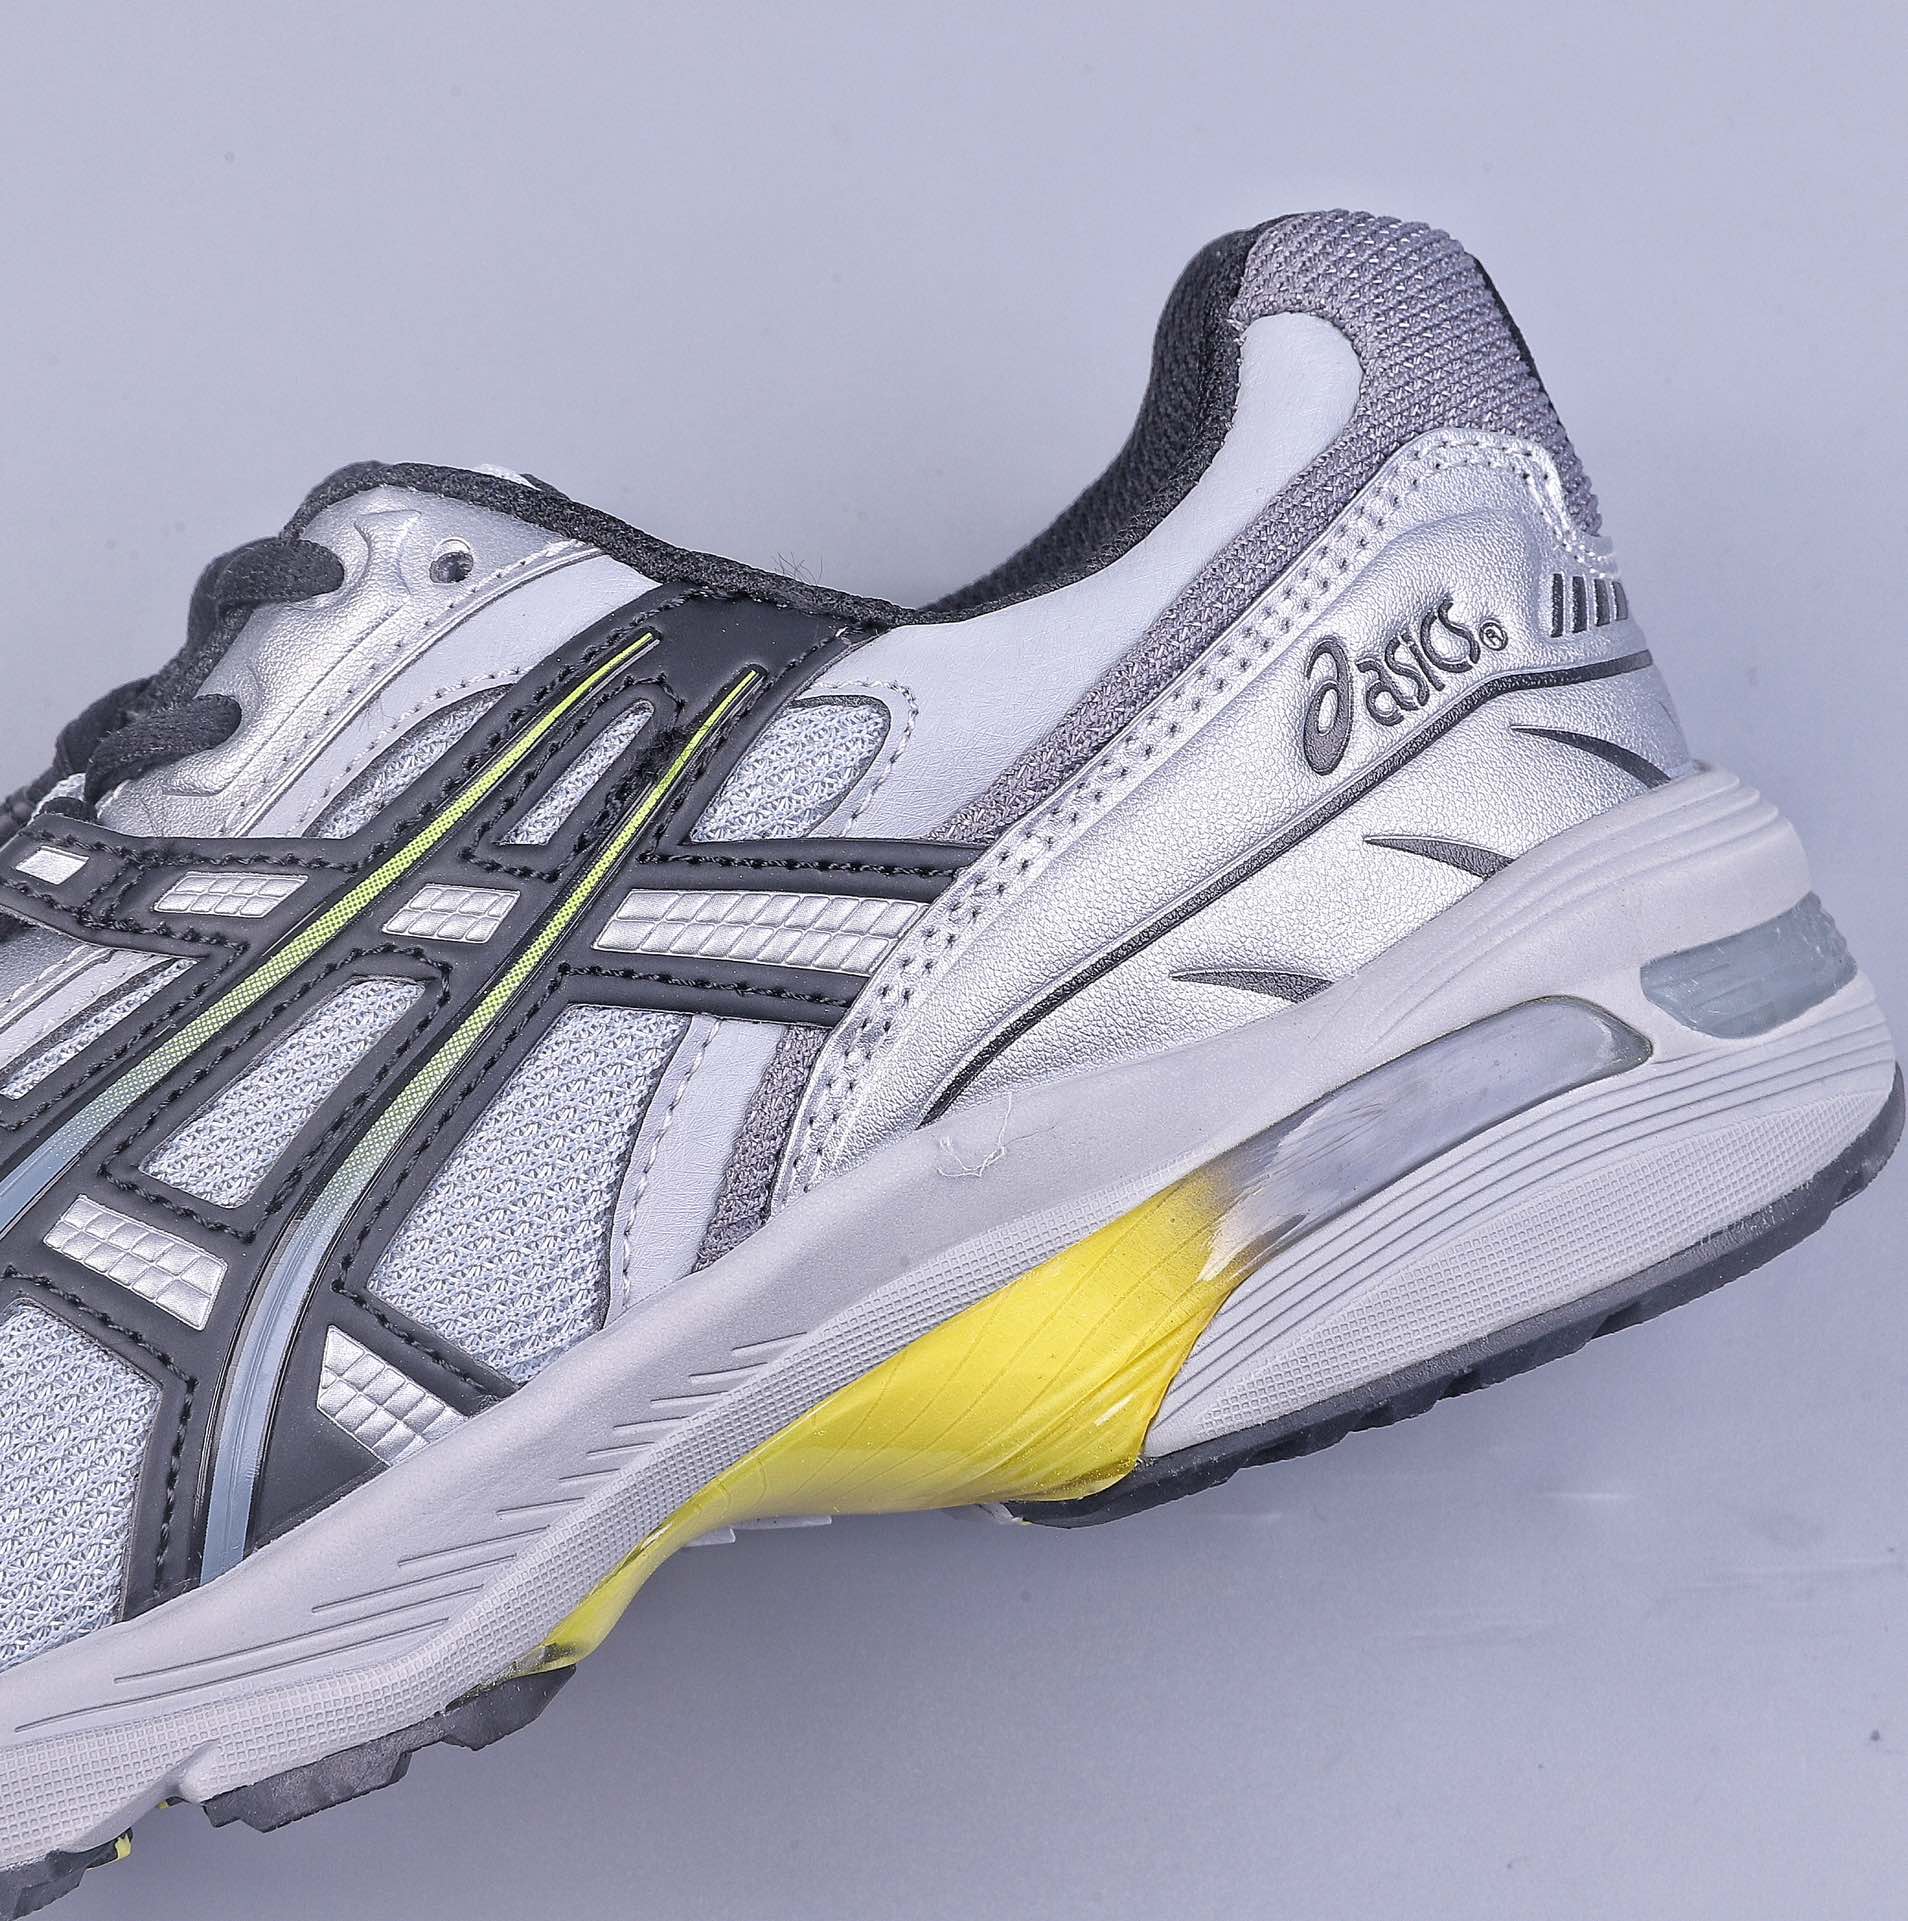 Asics Tiger GEL-1090 outdoor style low-top casual sports running shoes 1023A159-020